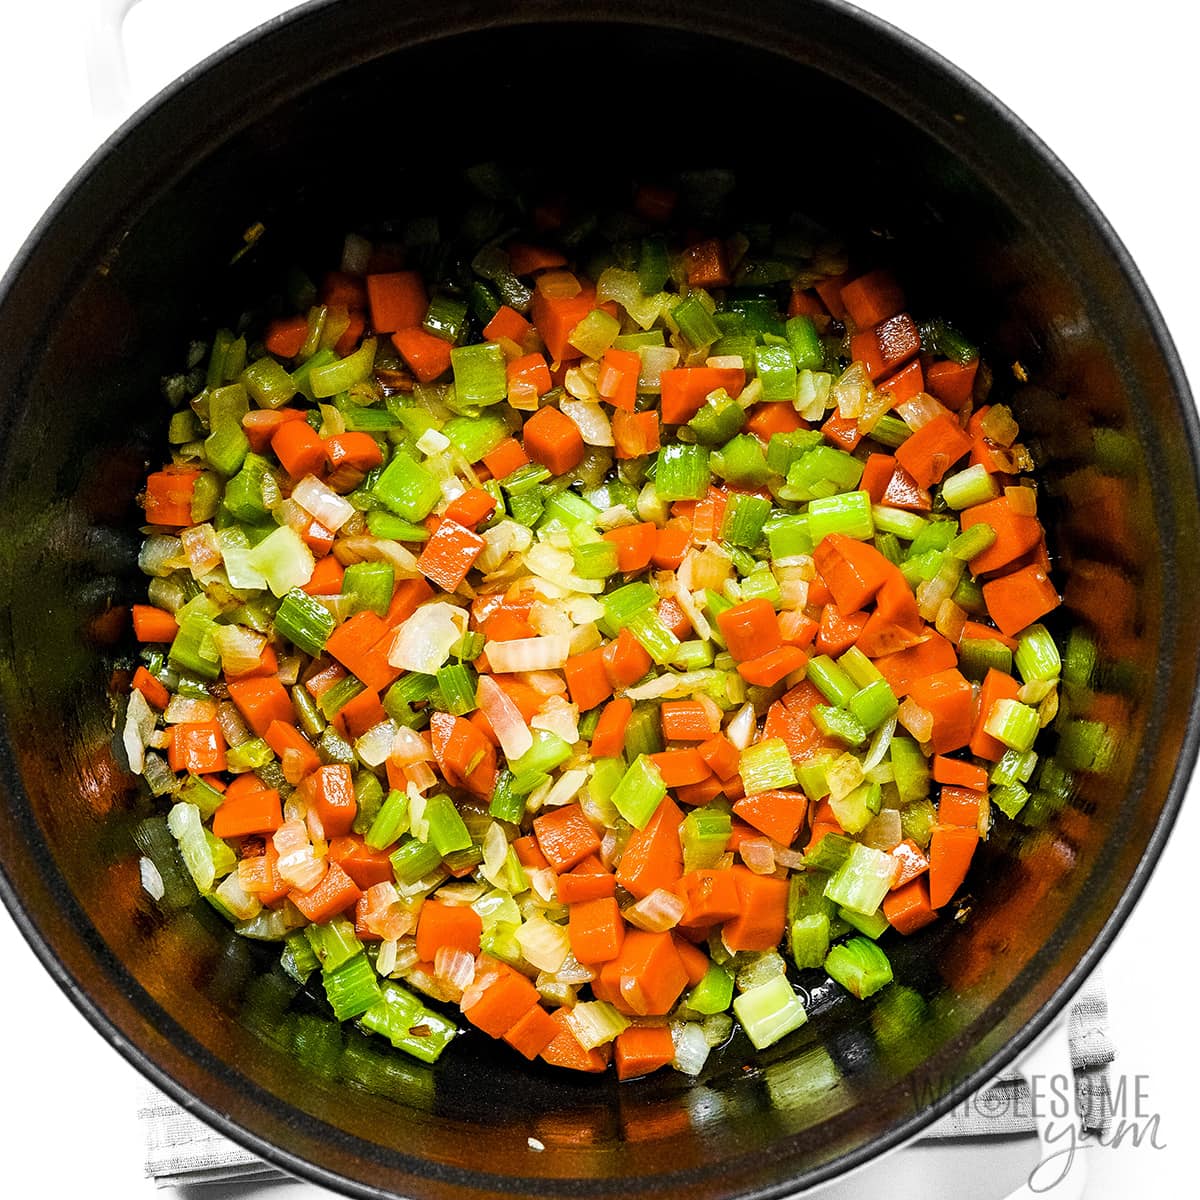 Cooked vegetables in a pot.